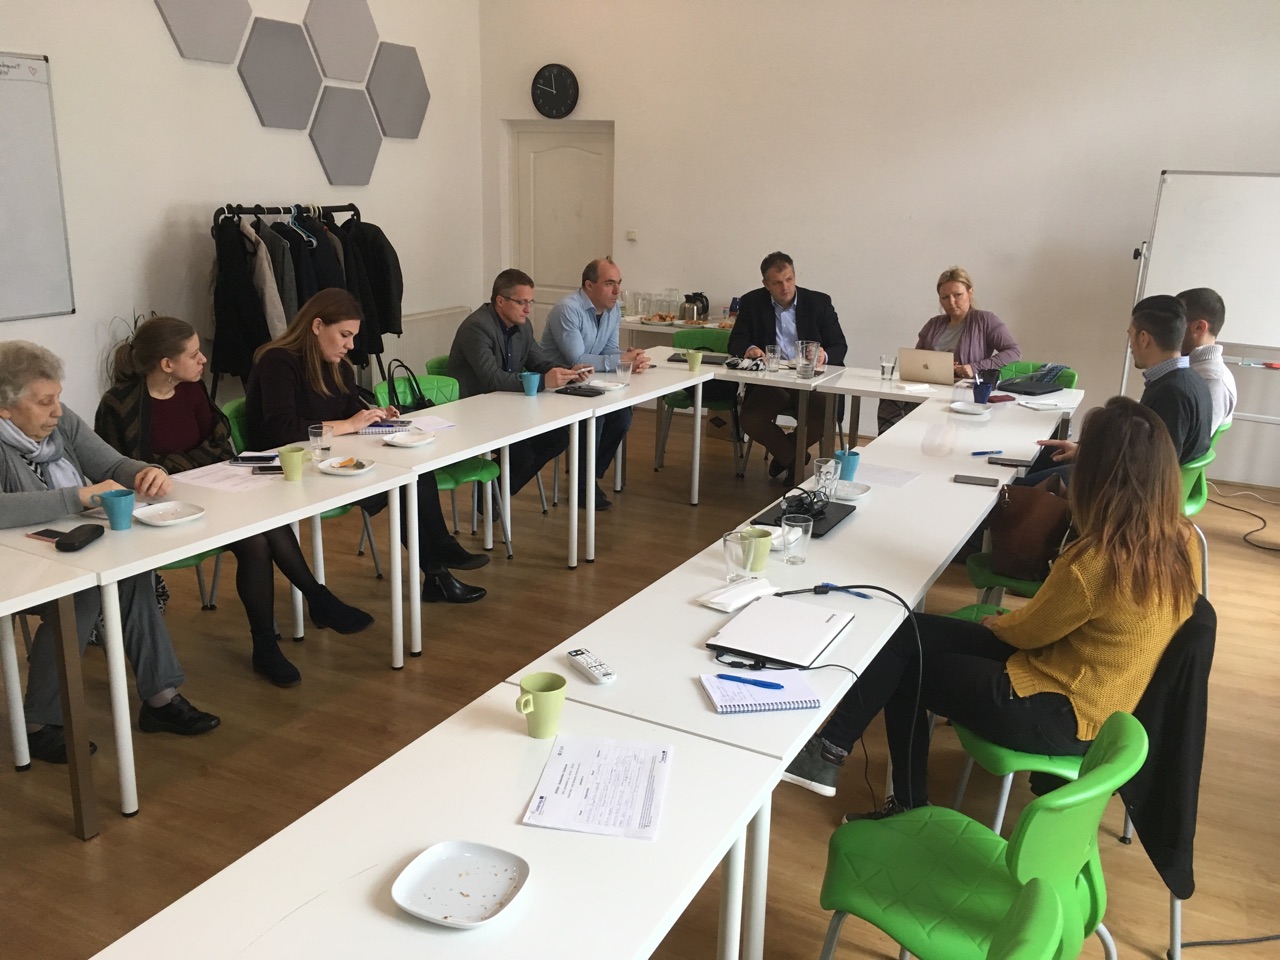 Second stakeholder group meeting in Hungary